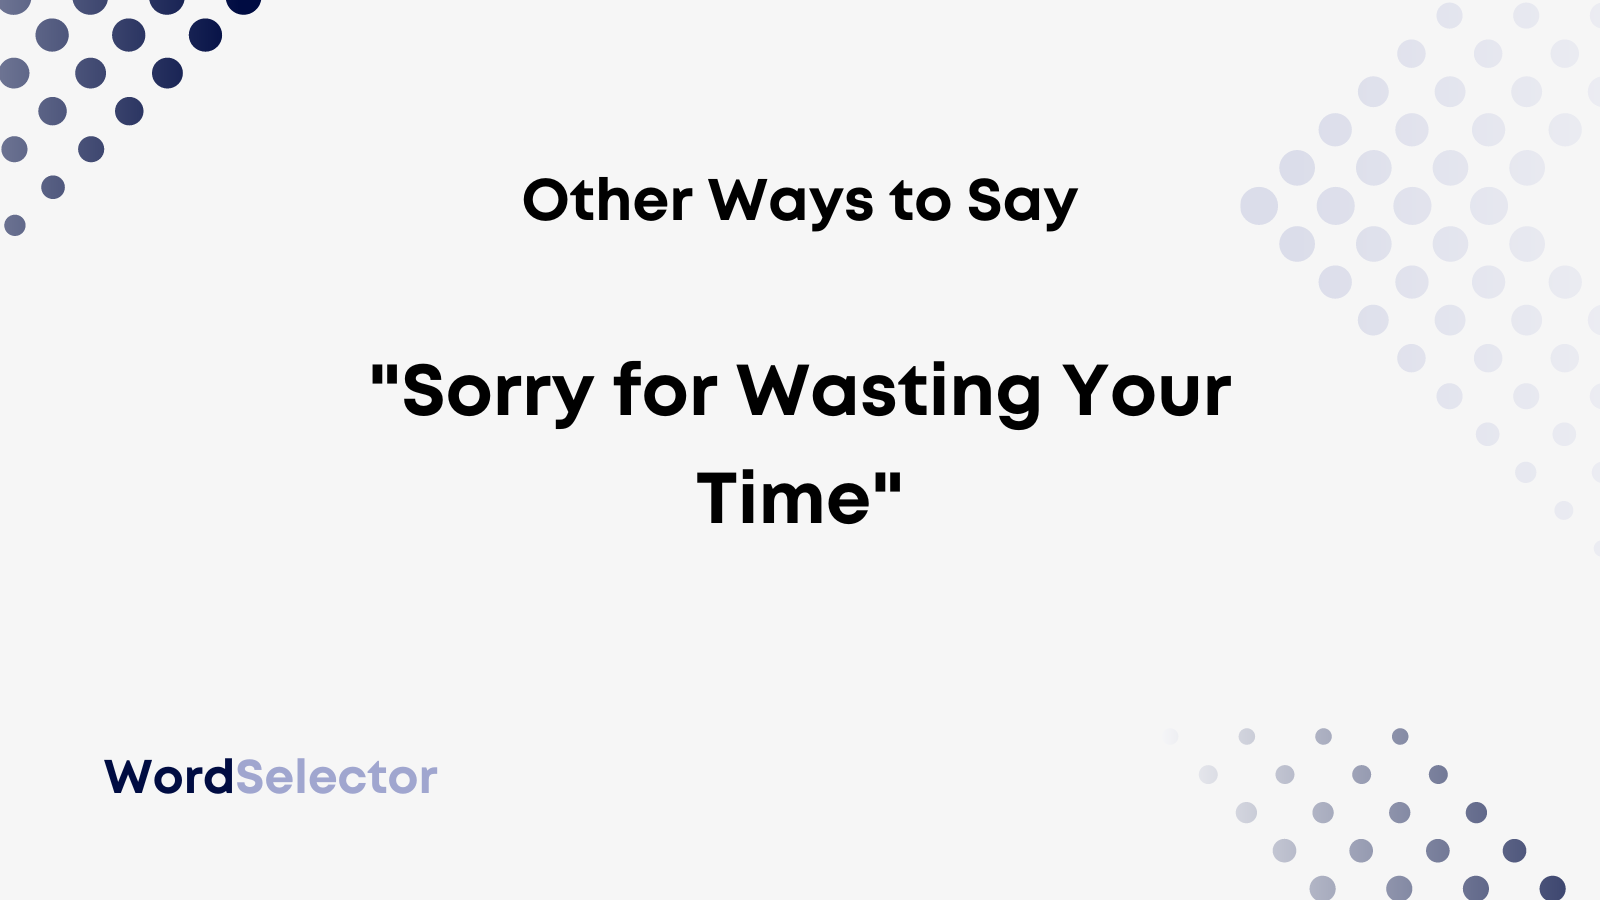 10 Other Ways to Say "Sorry for Wasting Your Time" WordSelector